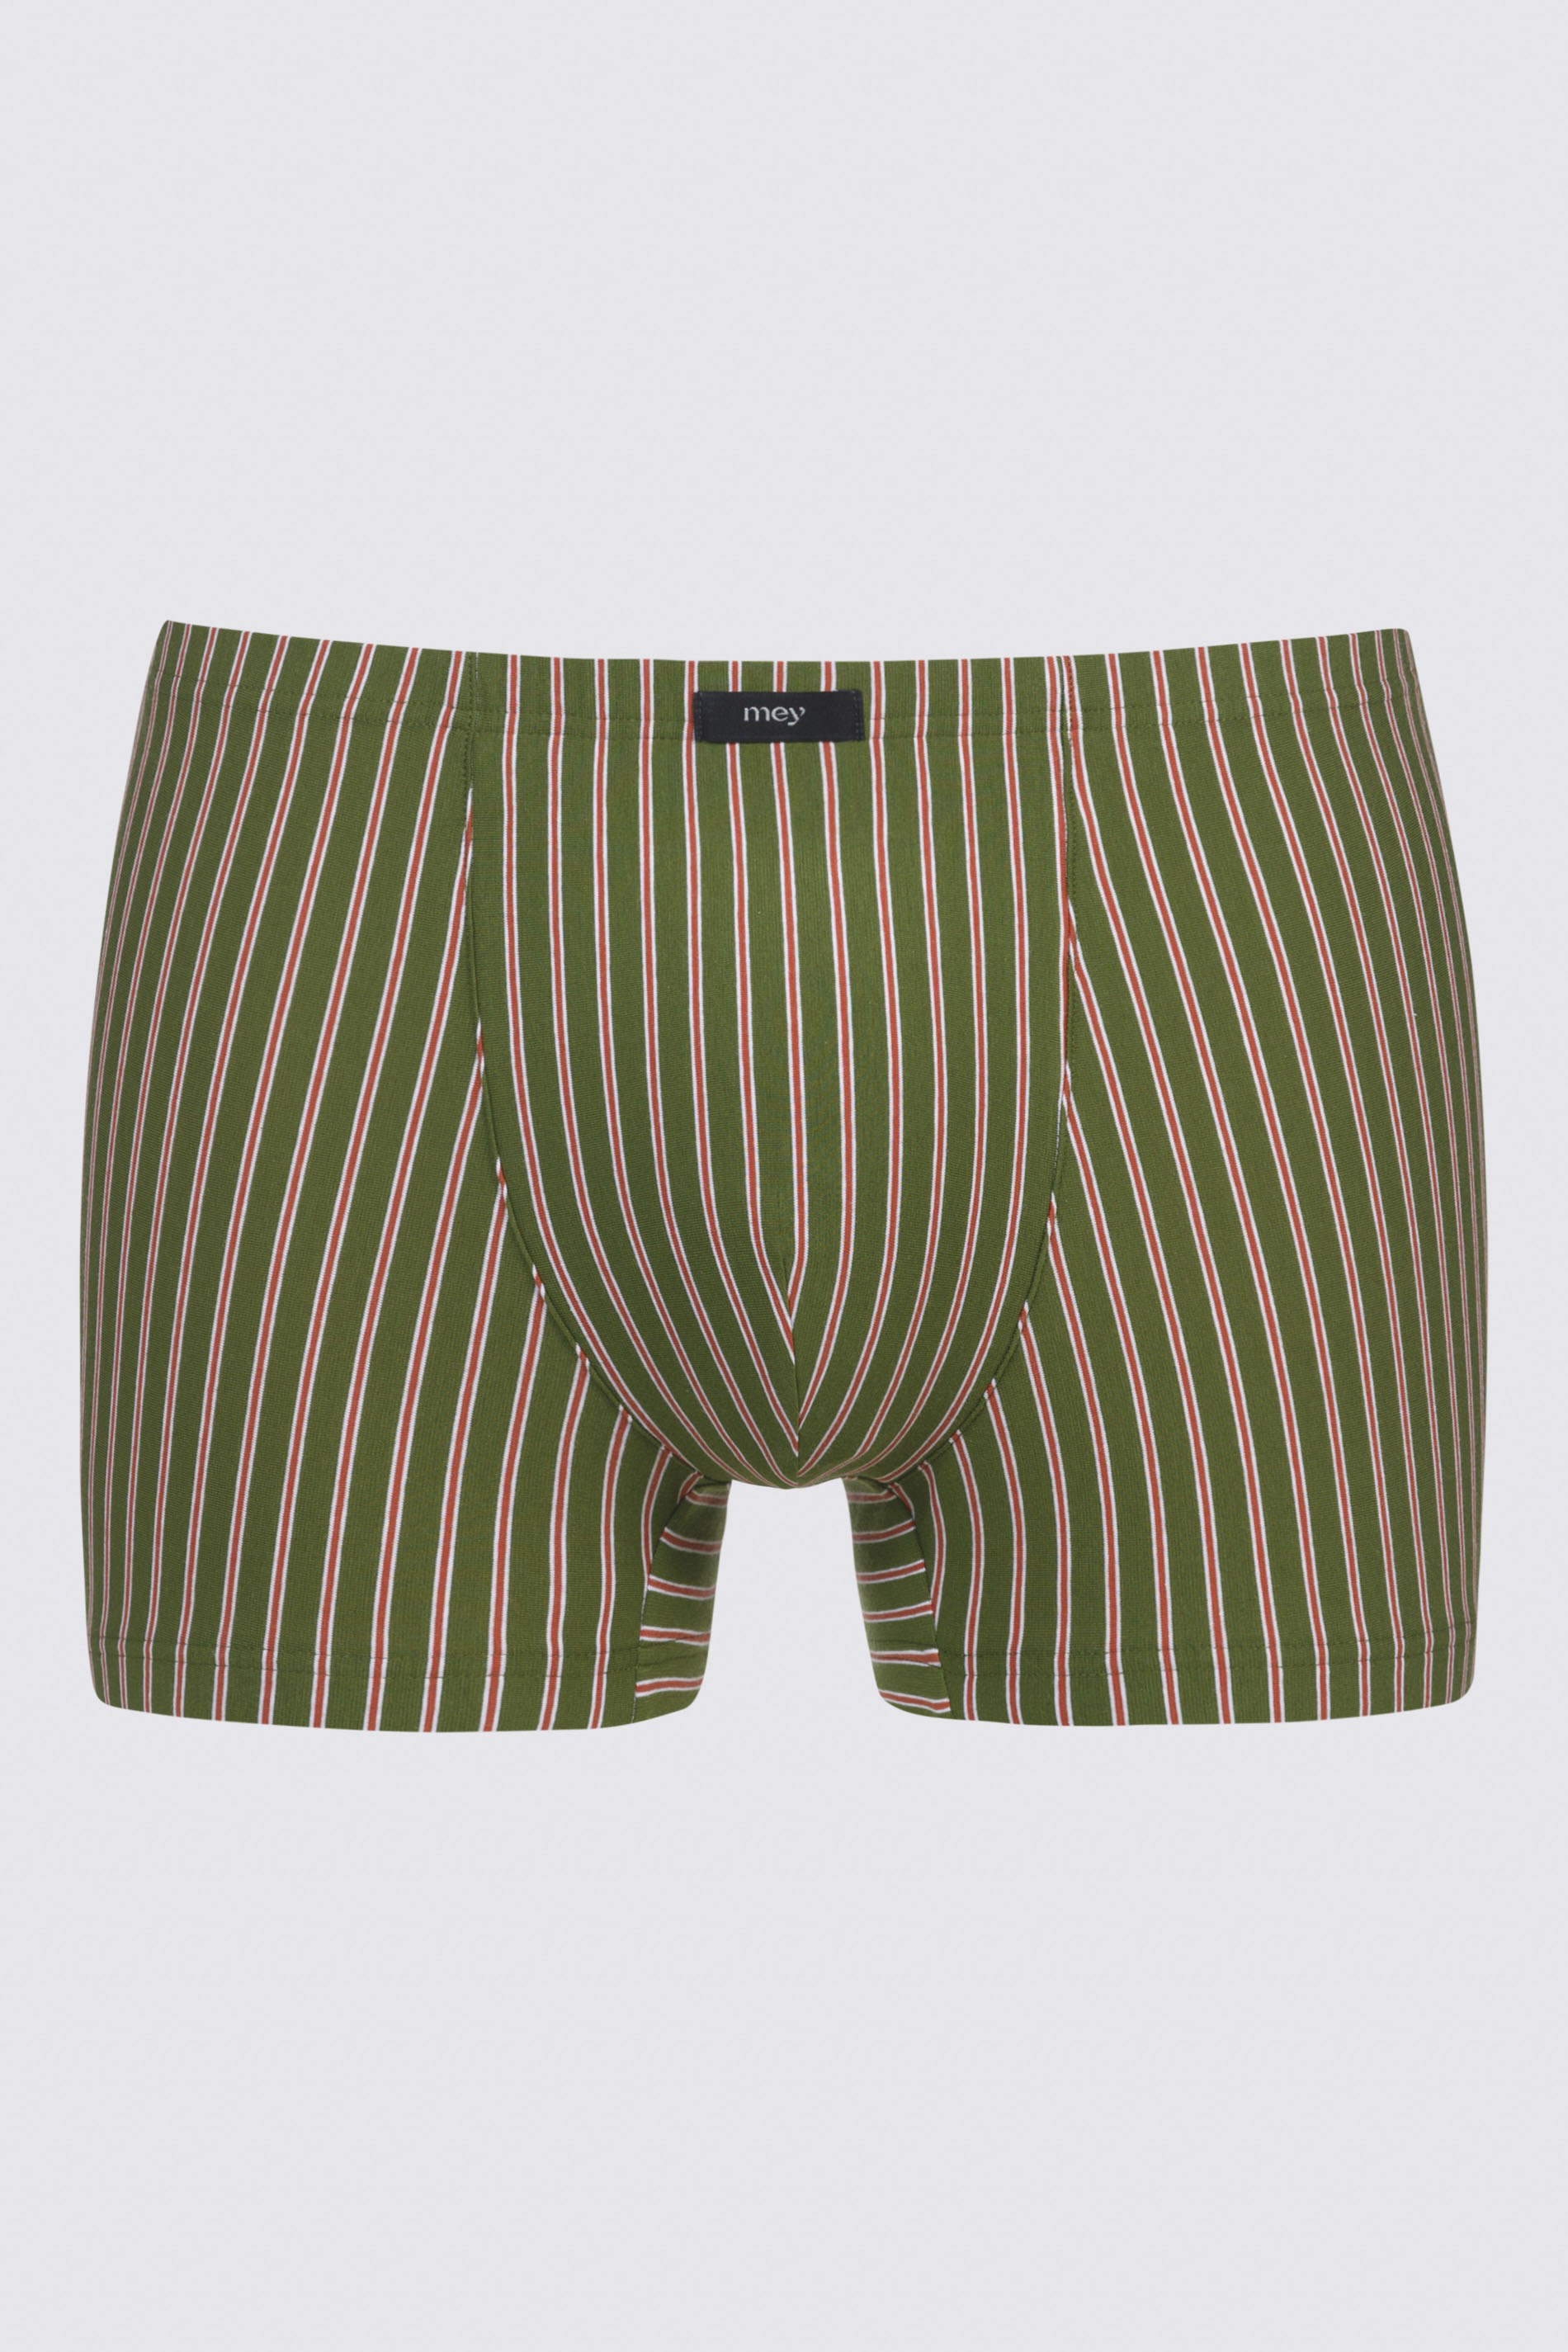 Shorty Serie Stripes Uitknippen | mey®